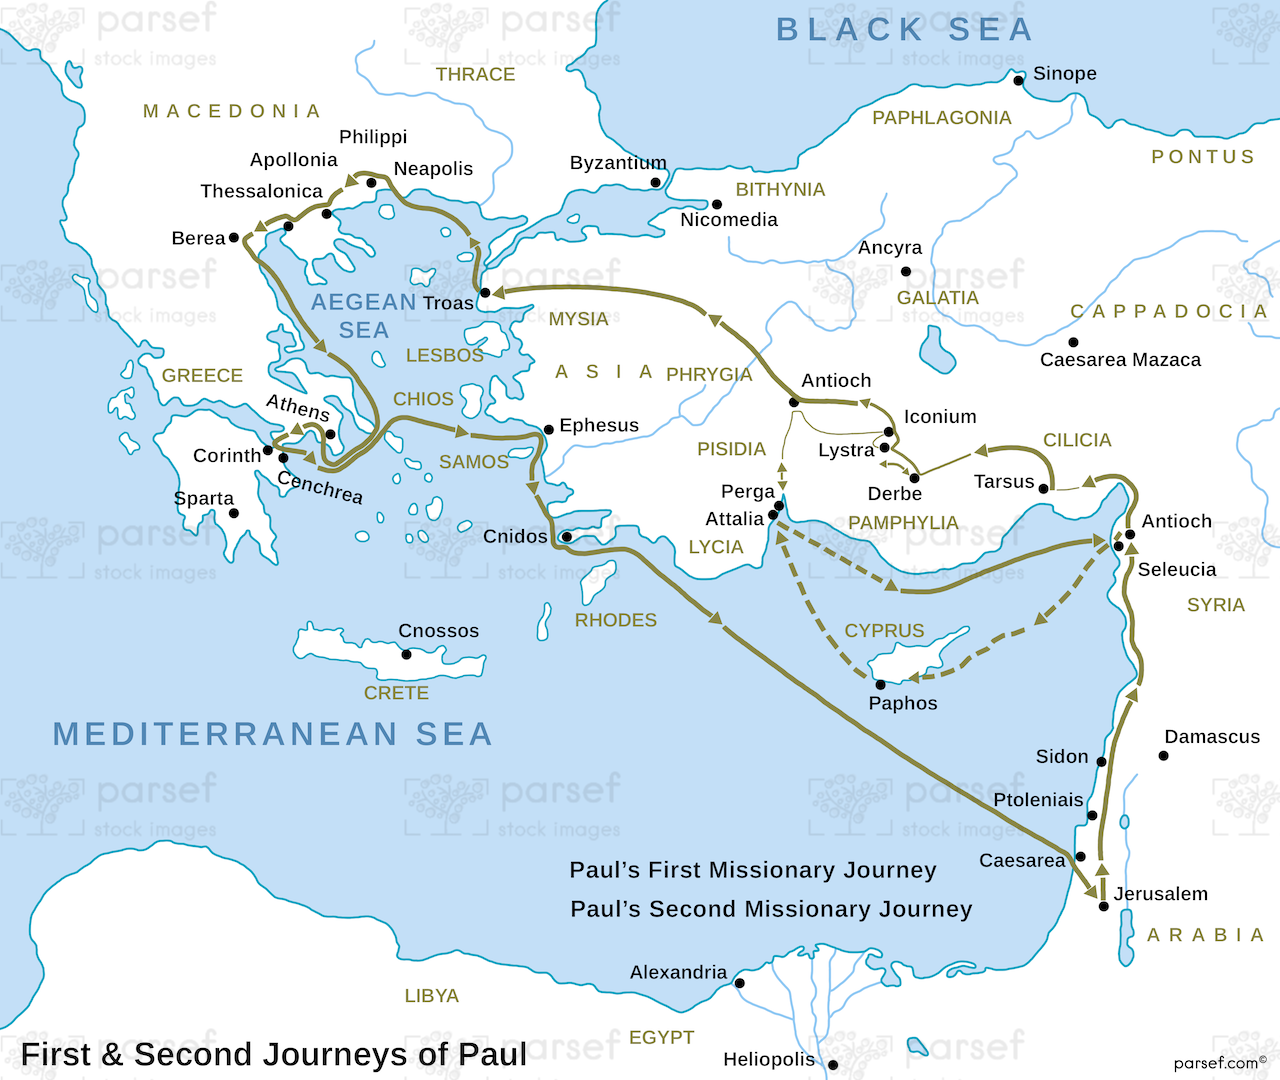 First & Second Journeys of Paul Map image